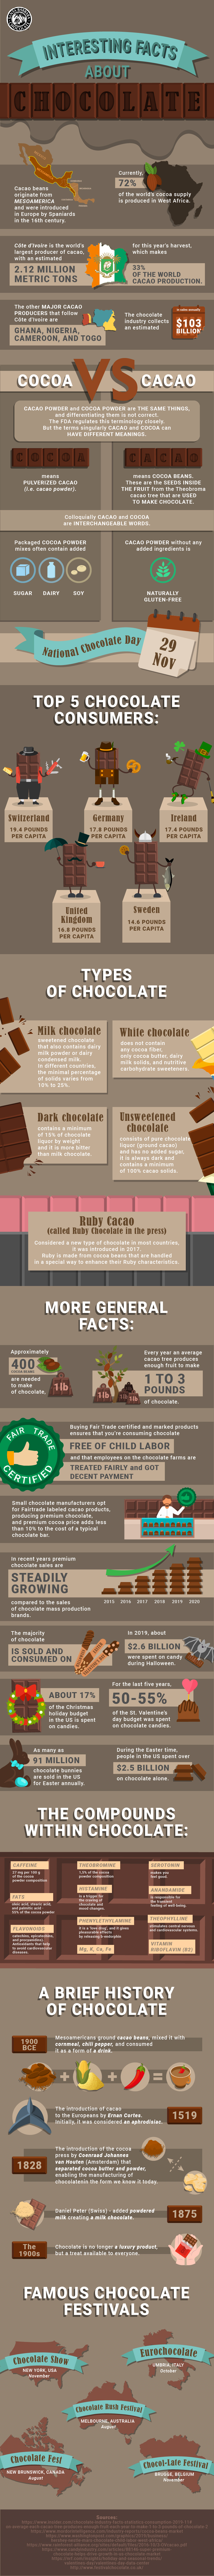 facts-about-chocolate